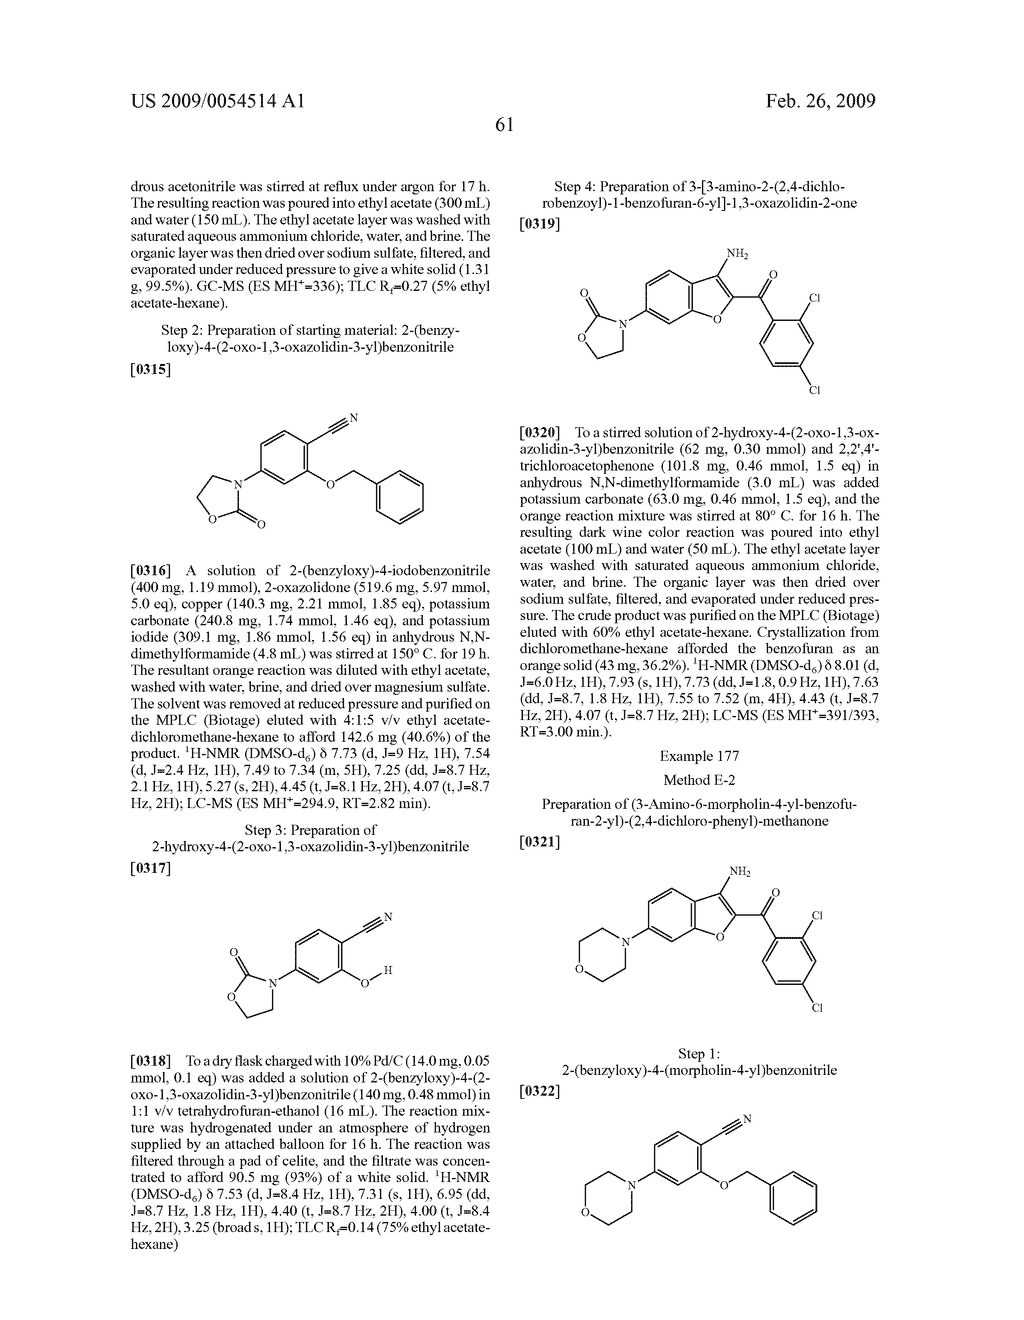 BENZOFURAN AND BENZOTHIOPHENE DERIVATIVES USEFUL IN THE TREATMENT OF HYPER-PROLIFERATIVE DISORDERS - diagram, schematic, and image 62